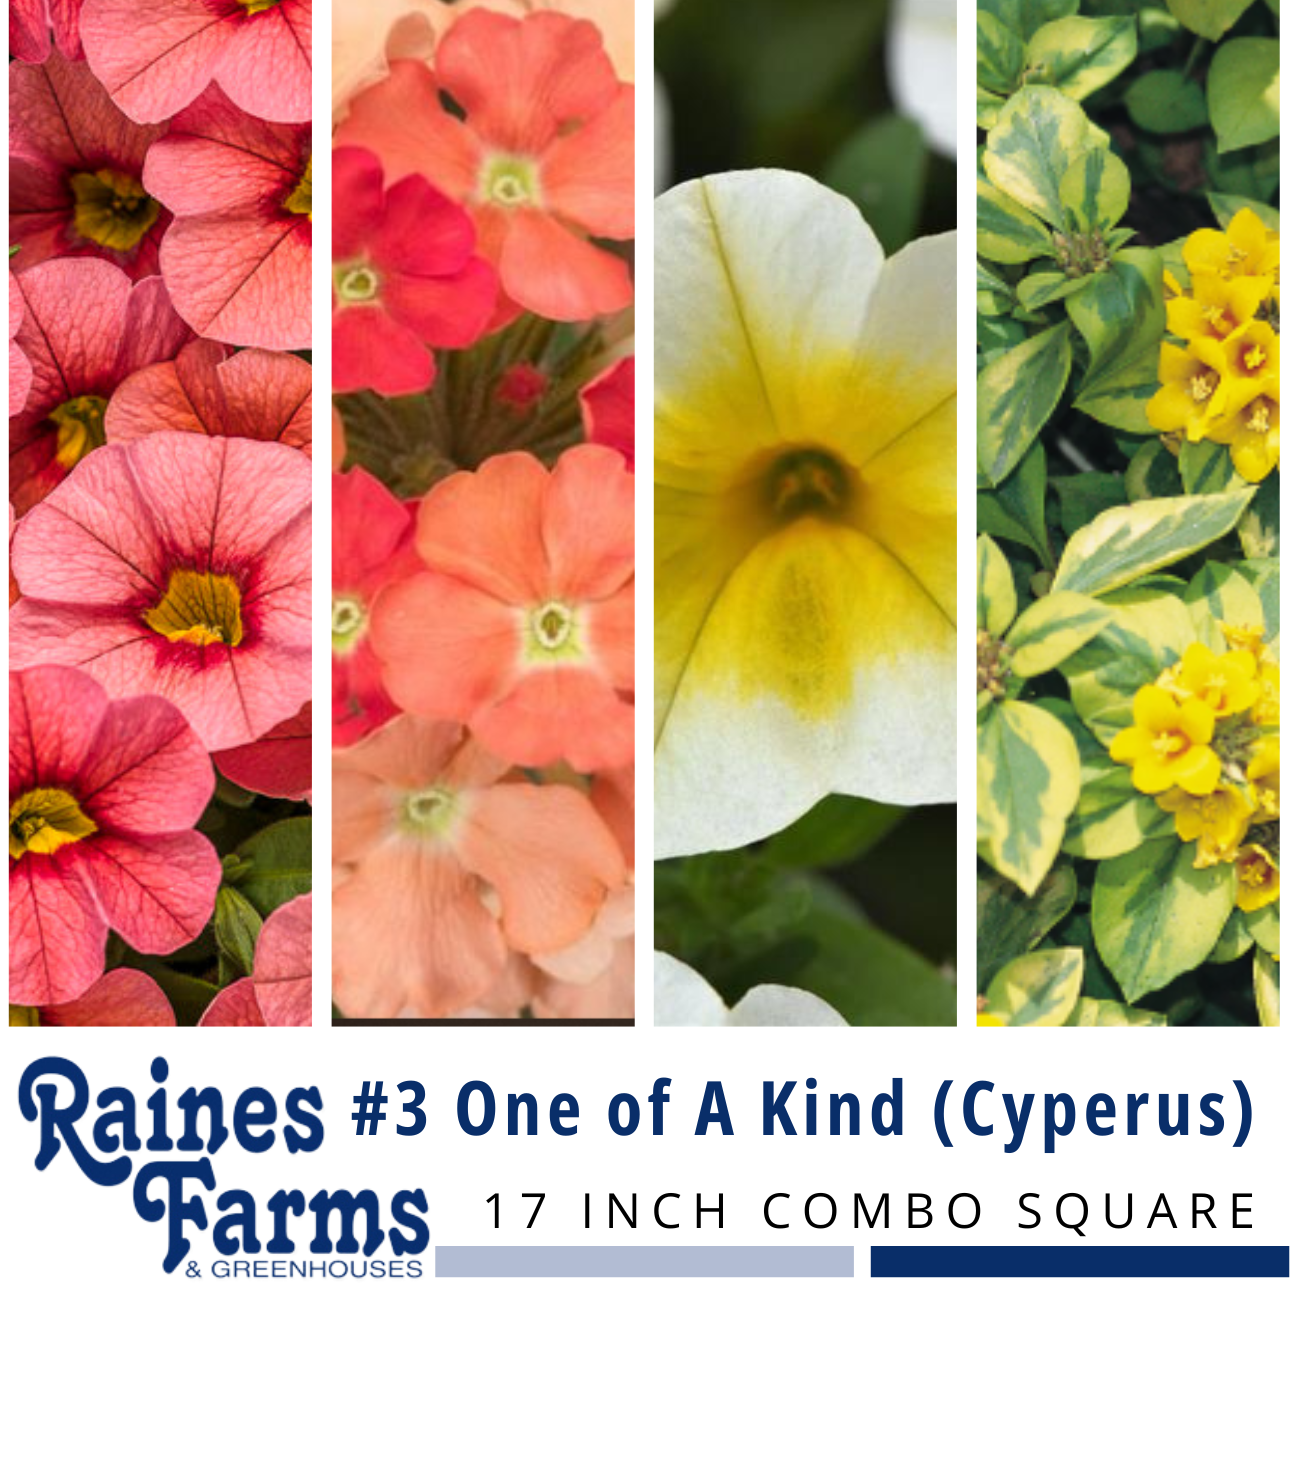 #3: One of a Kind (Cyperus) 17 Inch Combo Square